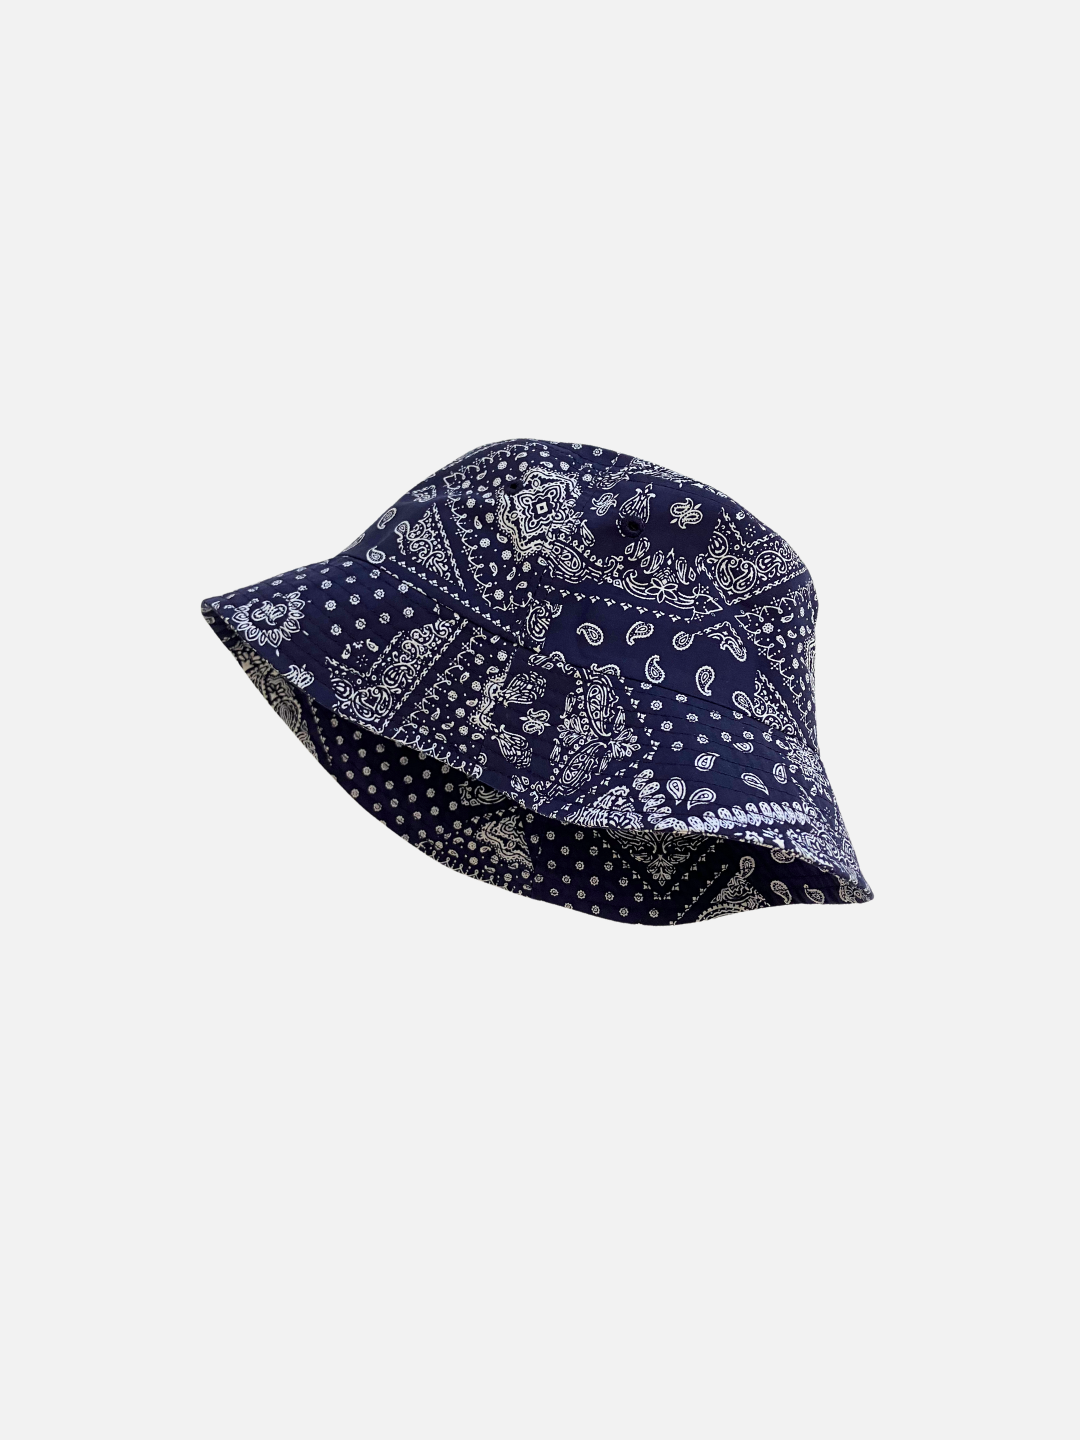  A navy kids bucket hat with bandana print shown from the side